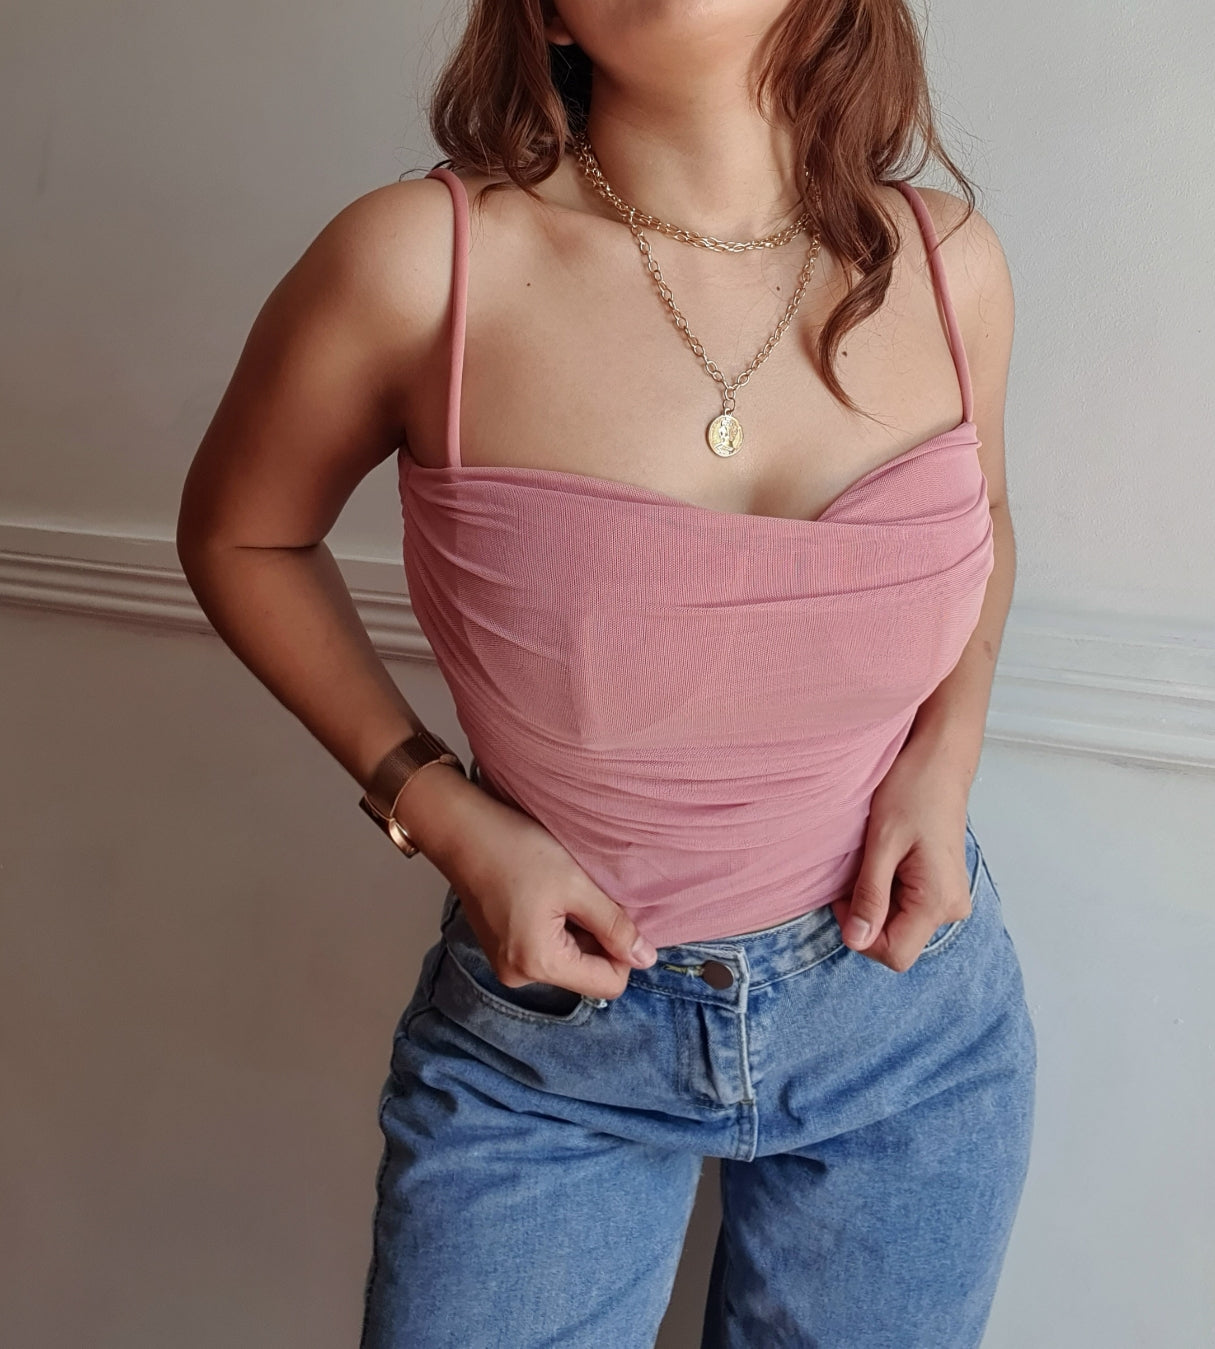 Strappy Bustier Mesh Top in Rose Pink